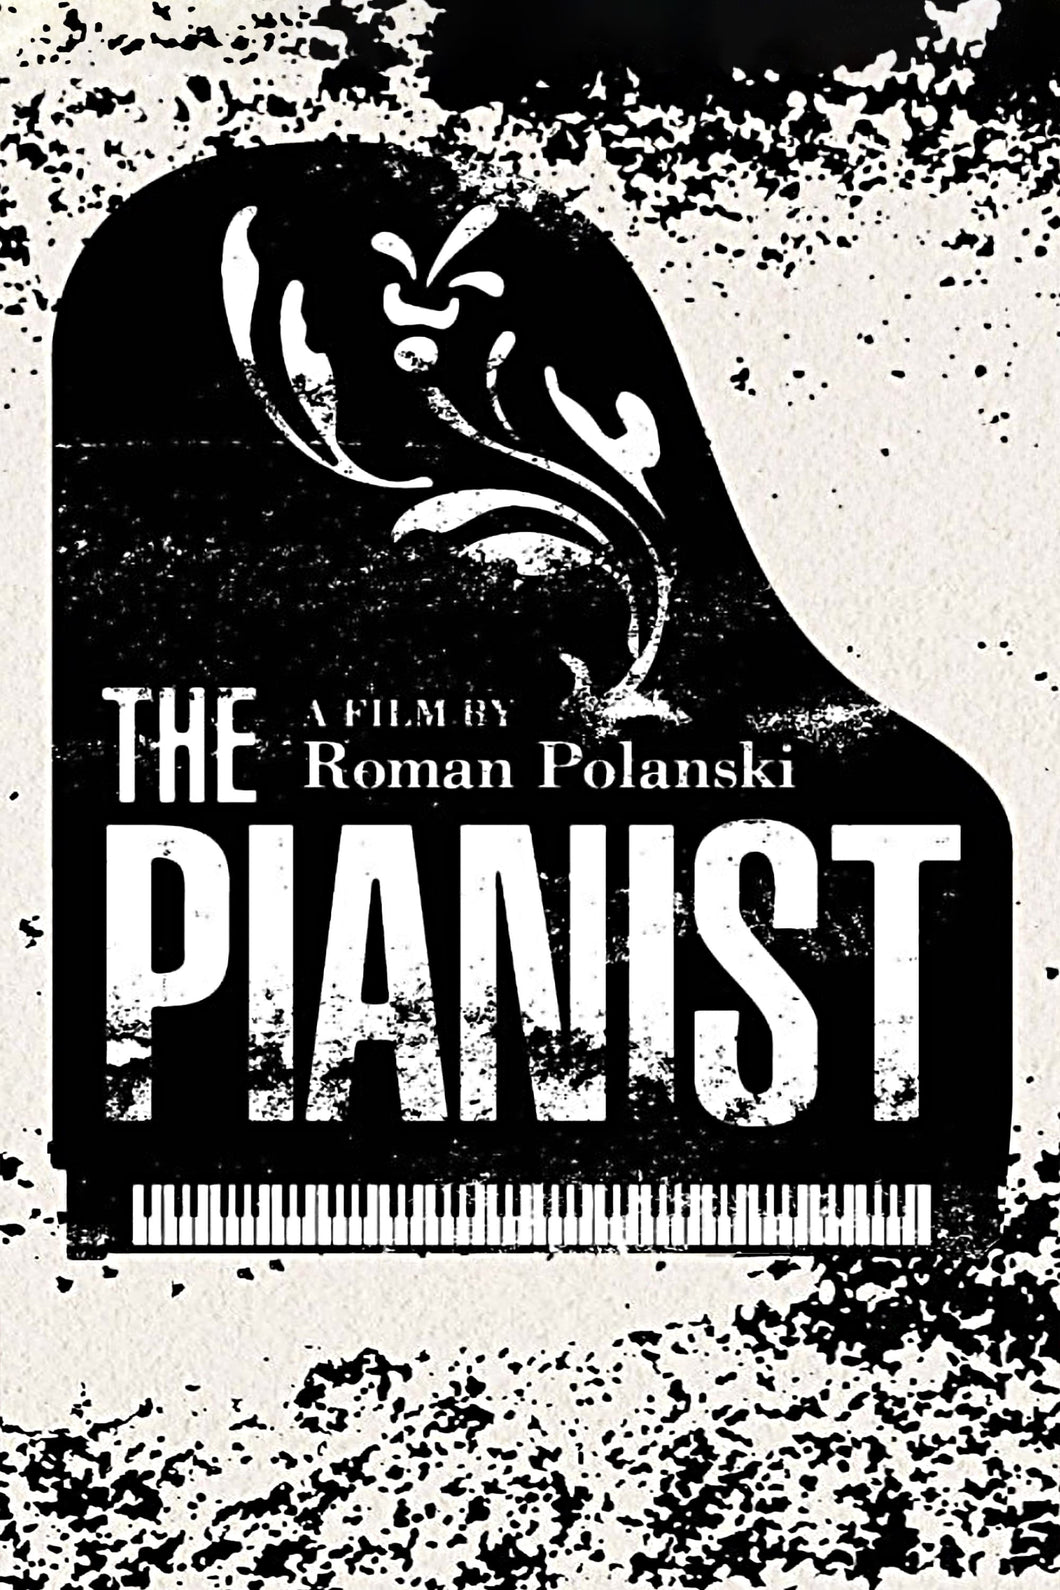 The Pianist (2002) Poster Framed or Unframed Glossy Poster Free UK Shipping!!!